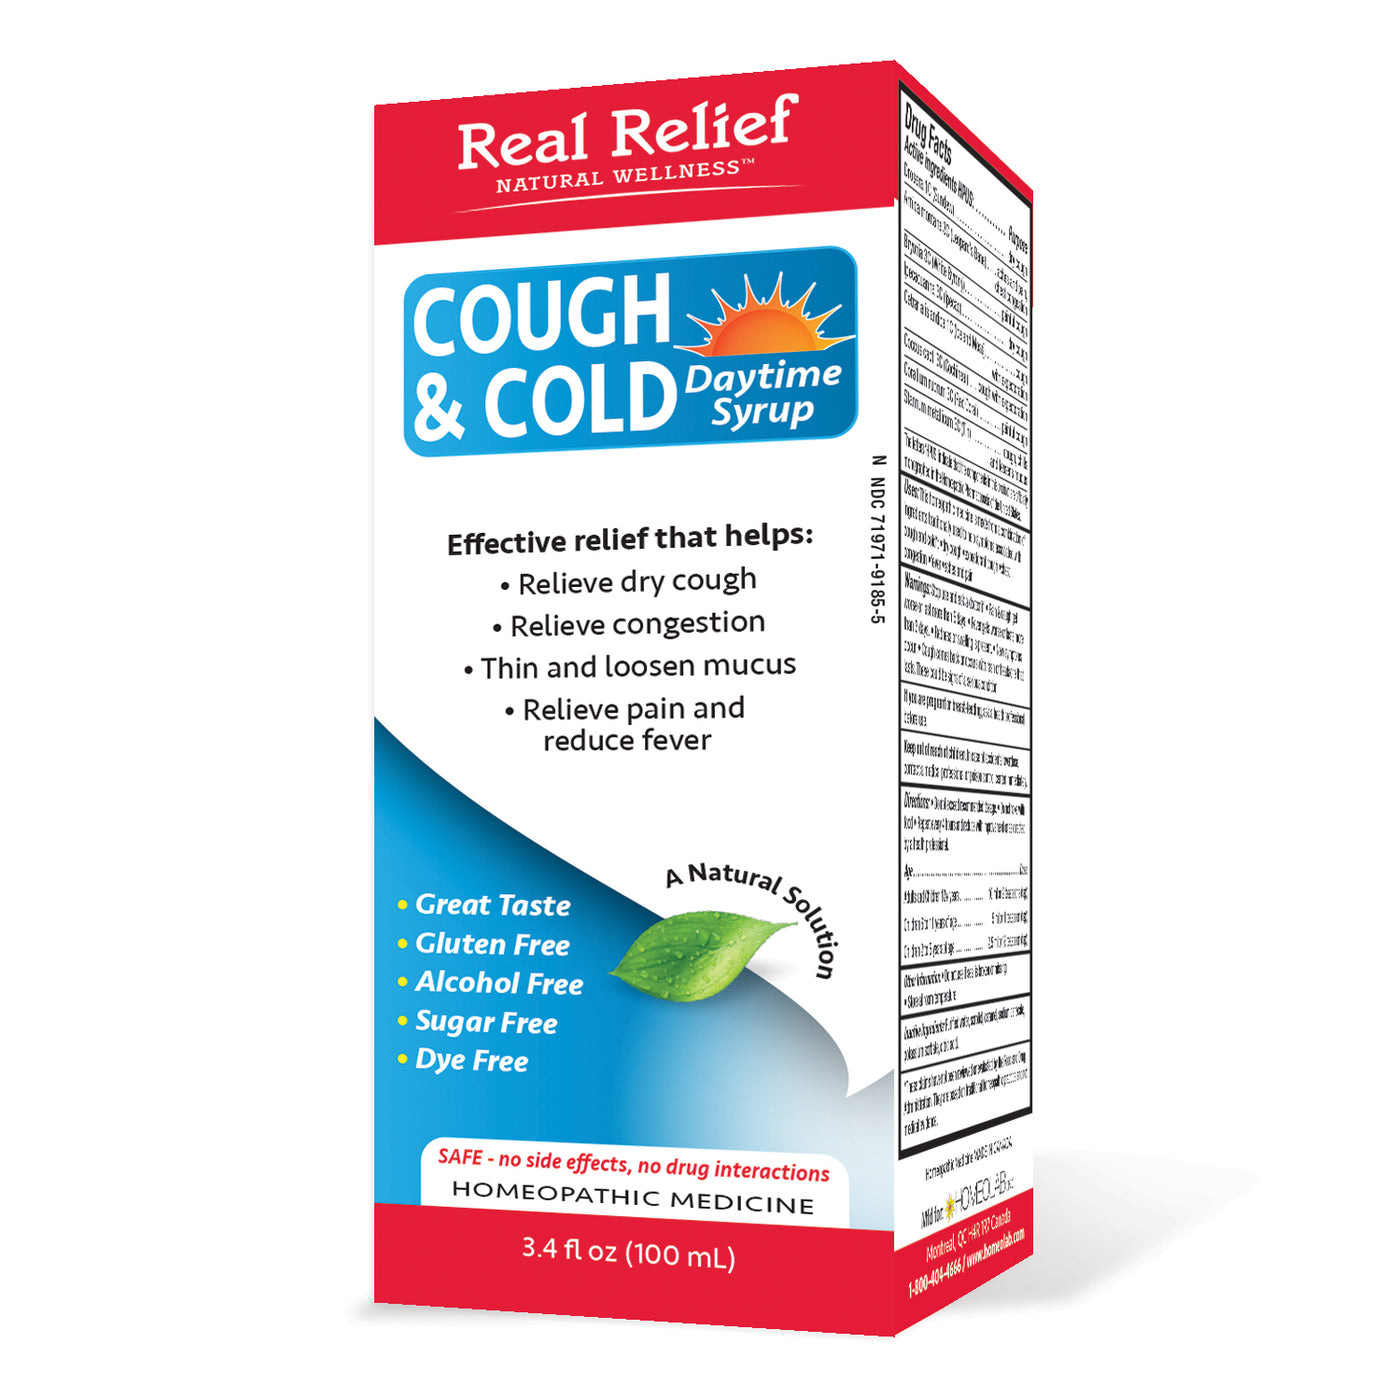 Real Relief Cough & Cold Daytime Syrup Non Drowsy Formula 3.4 Fl oz